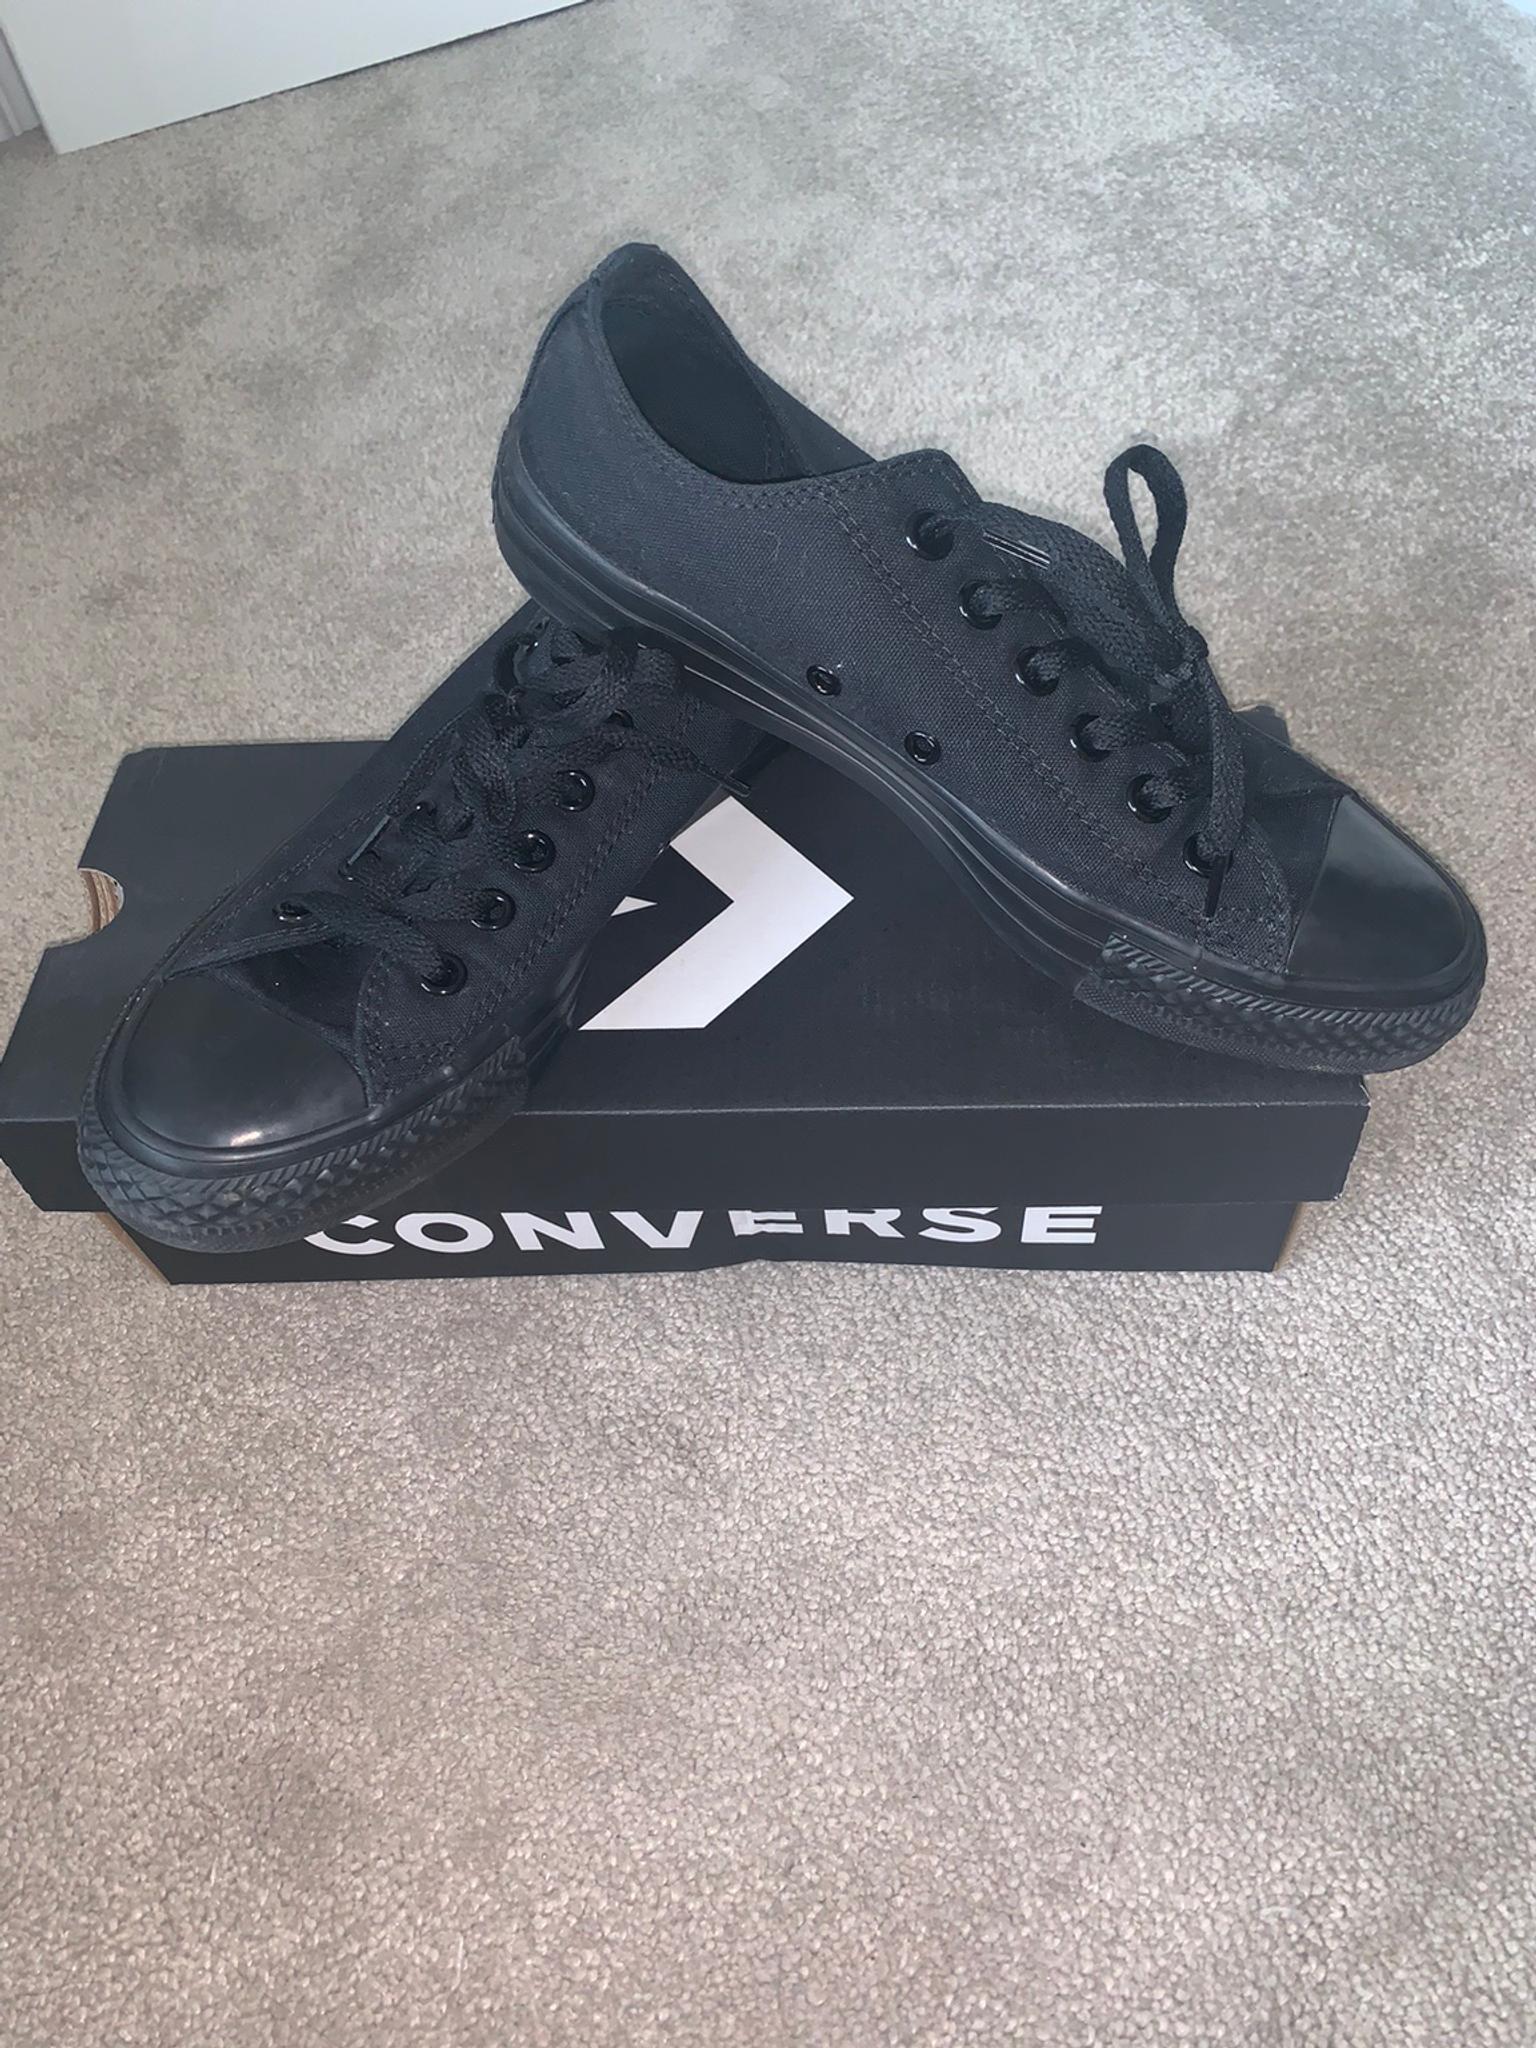 All black Converse UK 6 in CT6 Bay for £30.00 for sale | Shpock